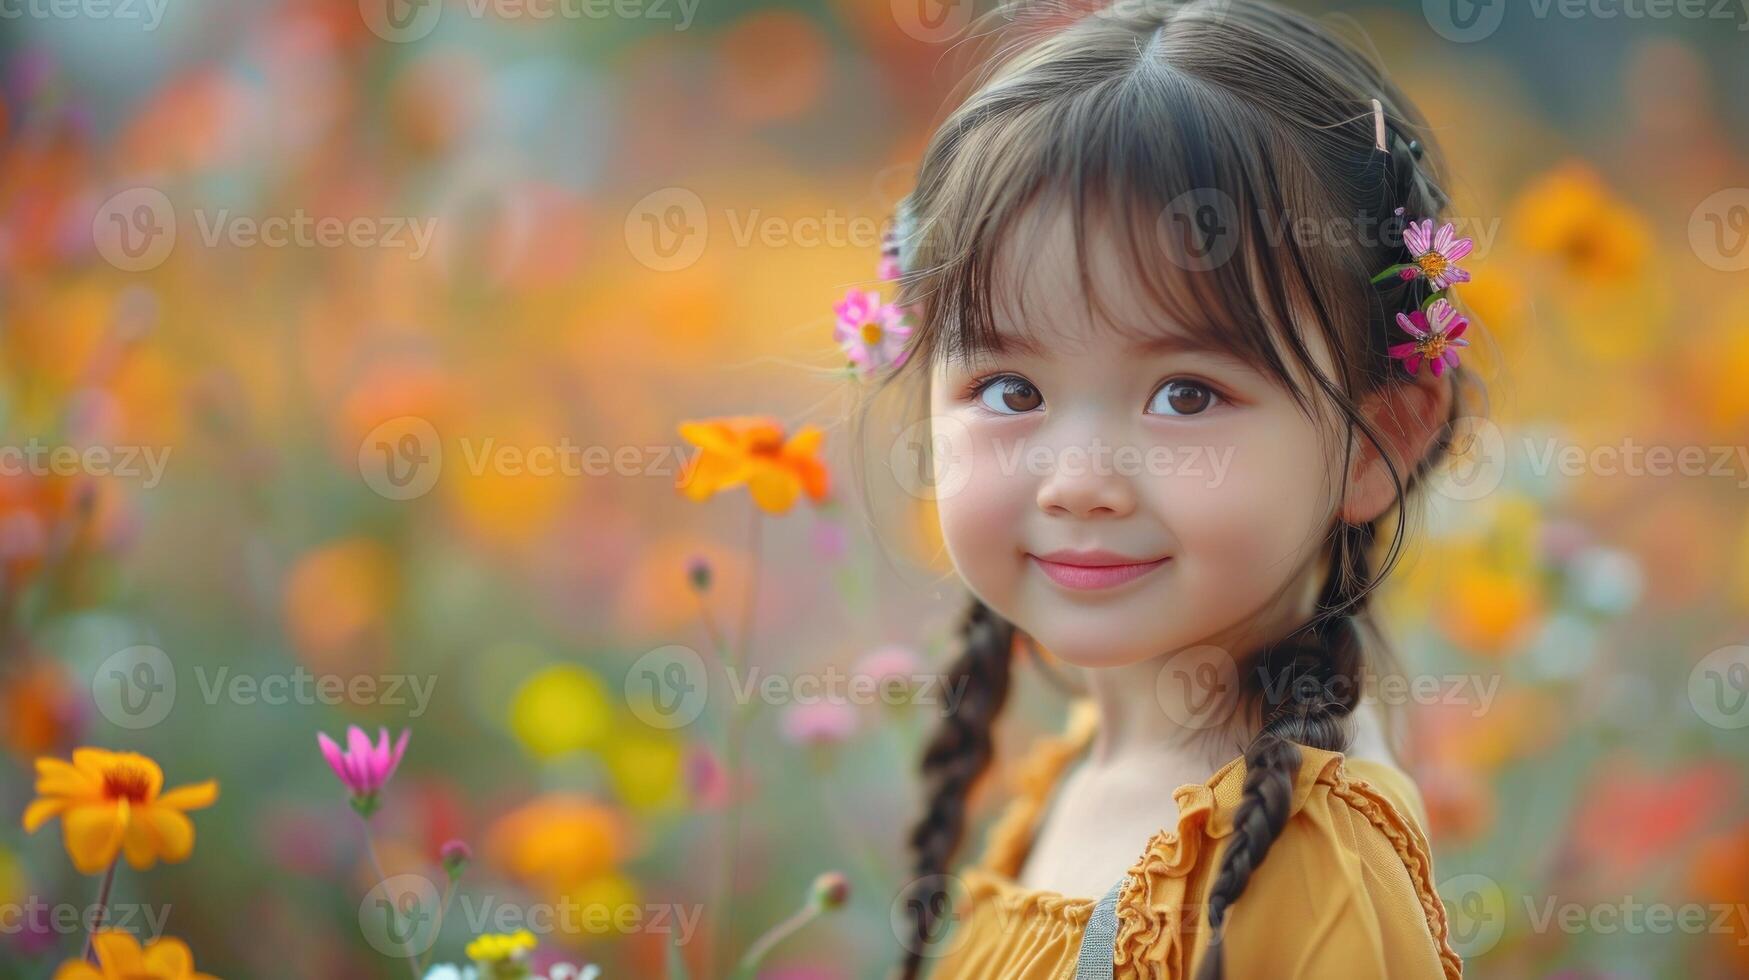 A young girl stands among blooming flowers in a vast field photo